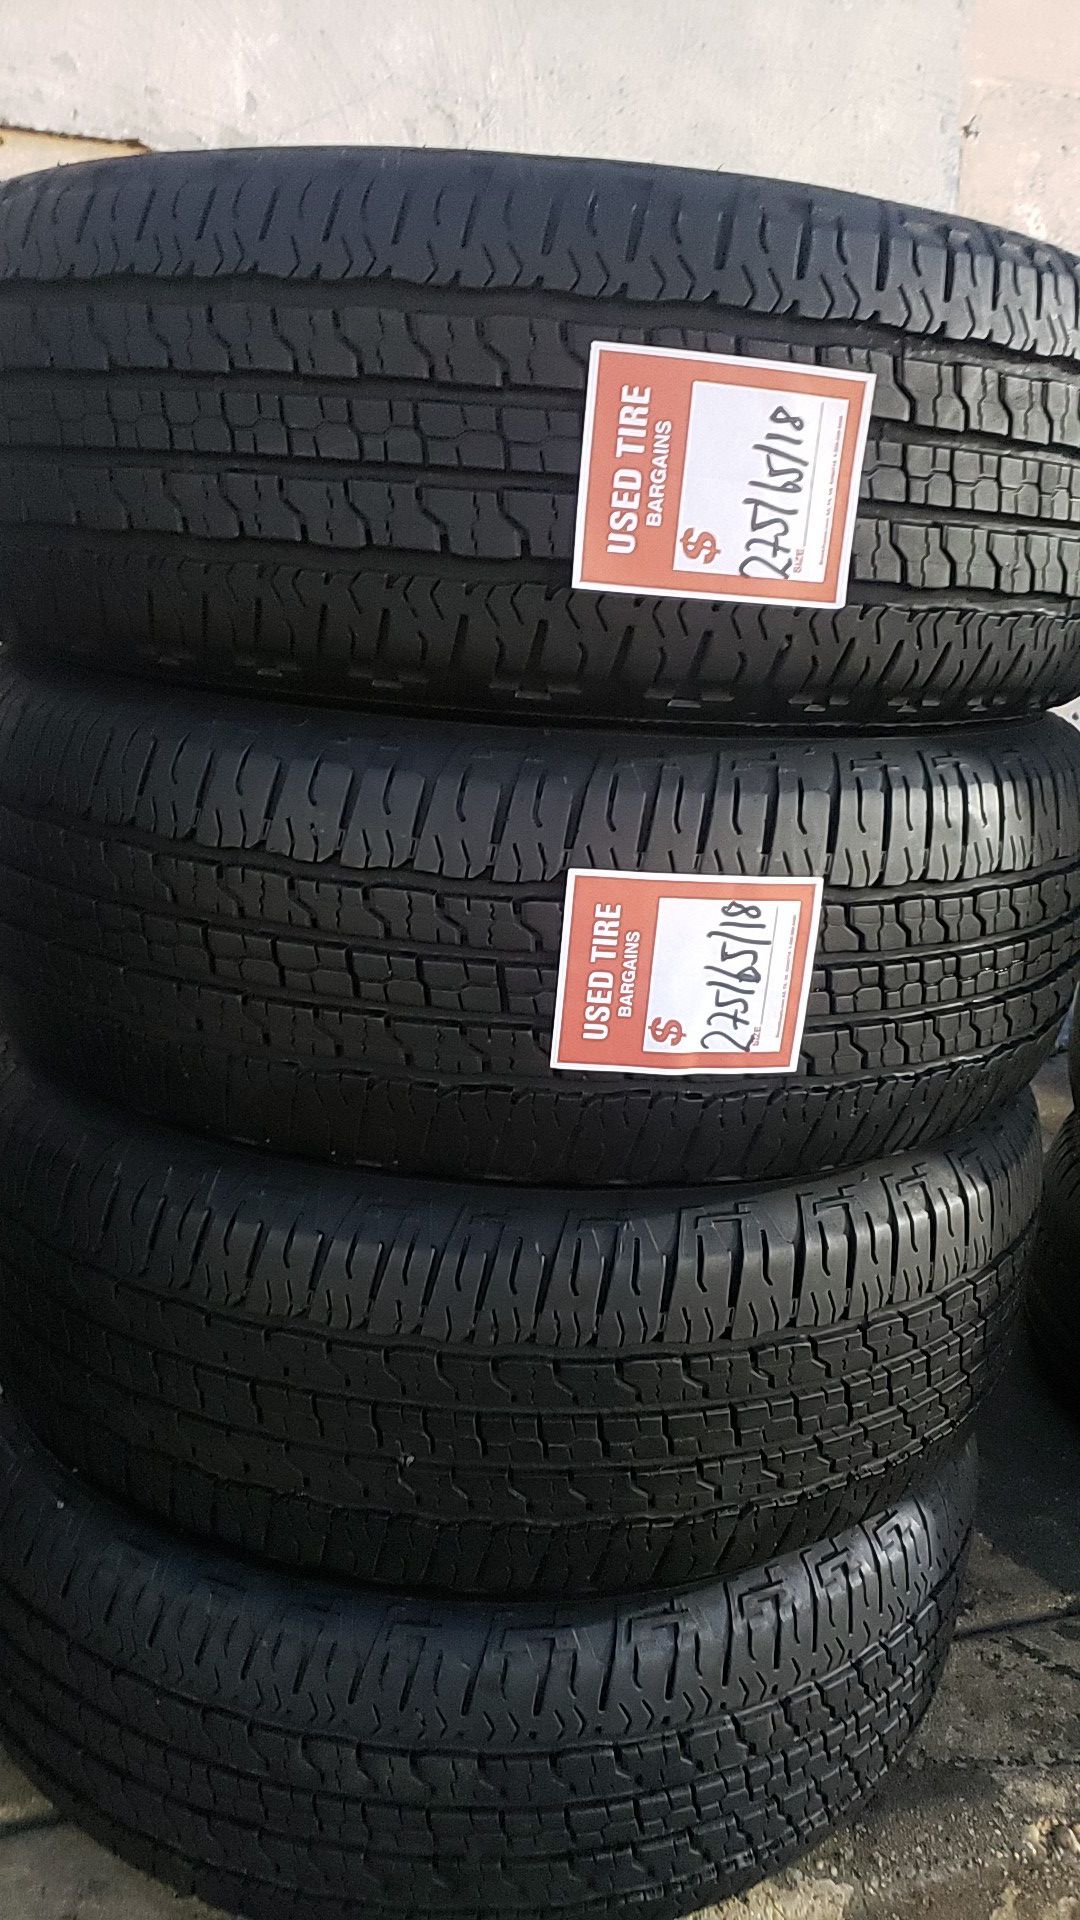 Four matching Goodyear tires for sale 275/65/18